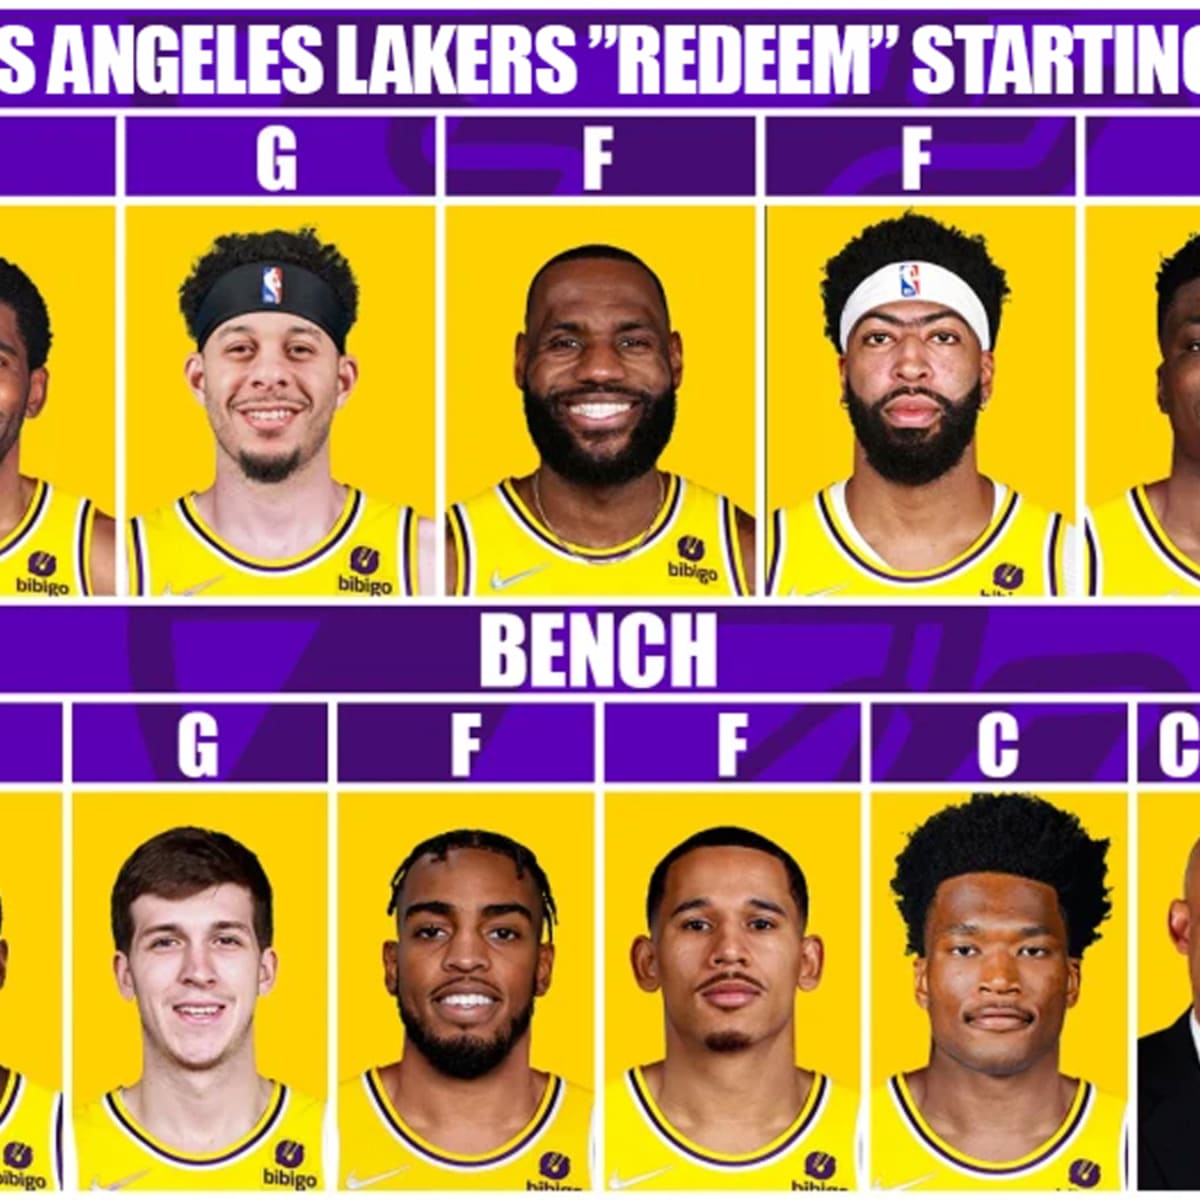 Lakerstv - ESPN Projected Lakers Starting Lineup next